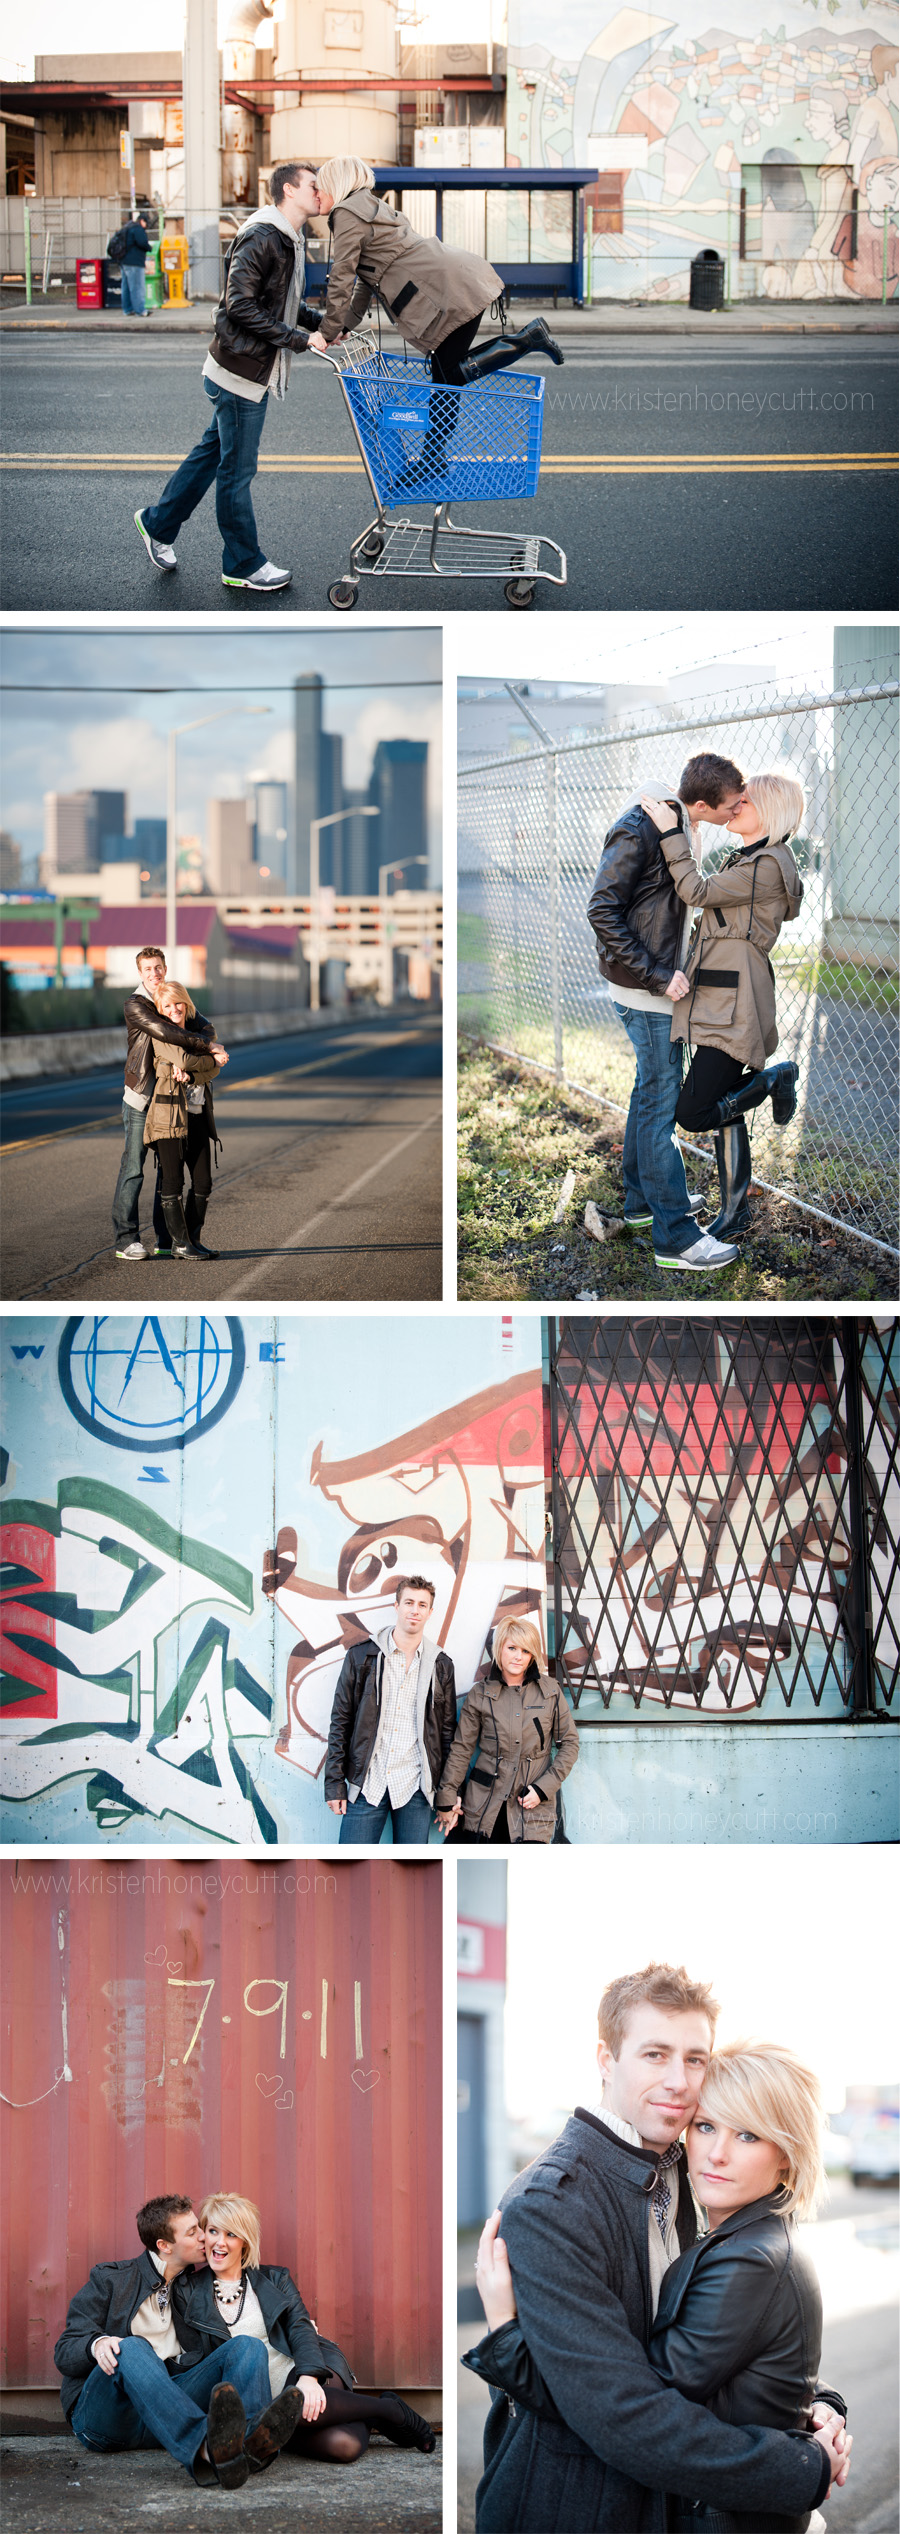 Engagement portraits on the streets of Seattle's SODO neighborhood.